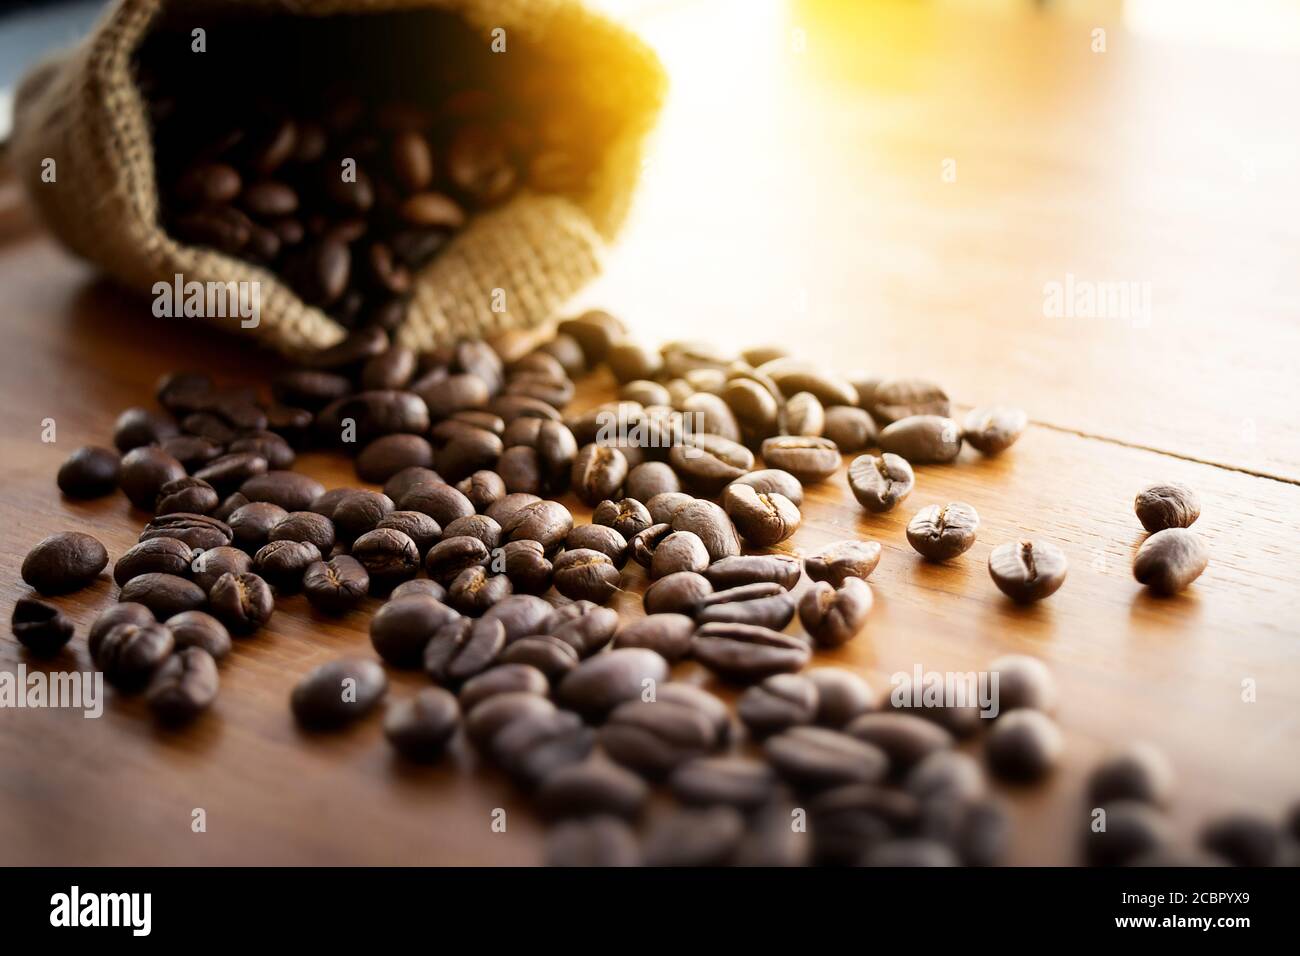 Coffee beans background : Coffee bean on grunge wooden background , selective focus with vintage effect. Stock Photo